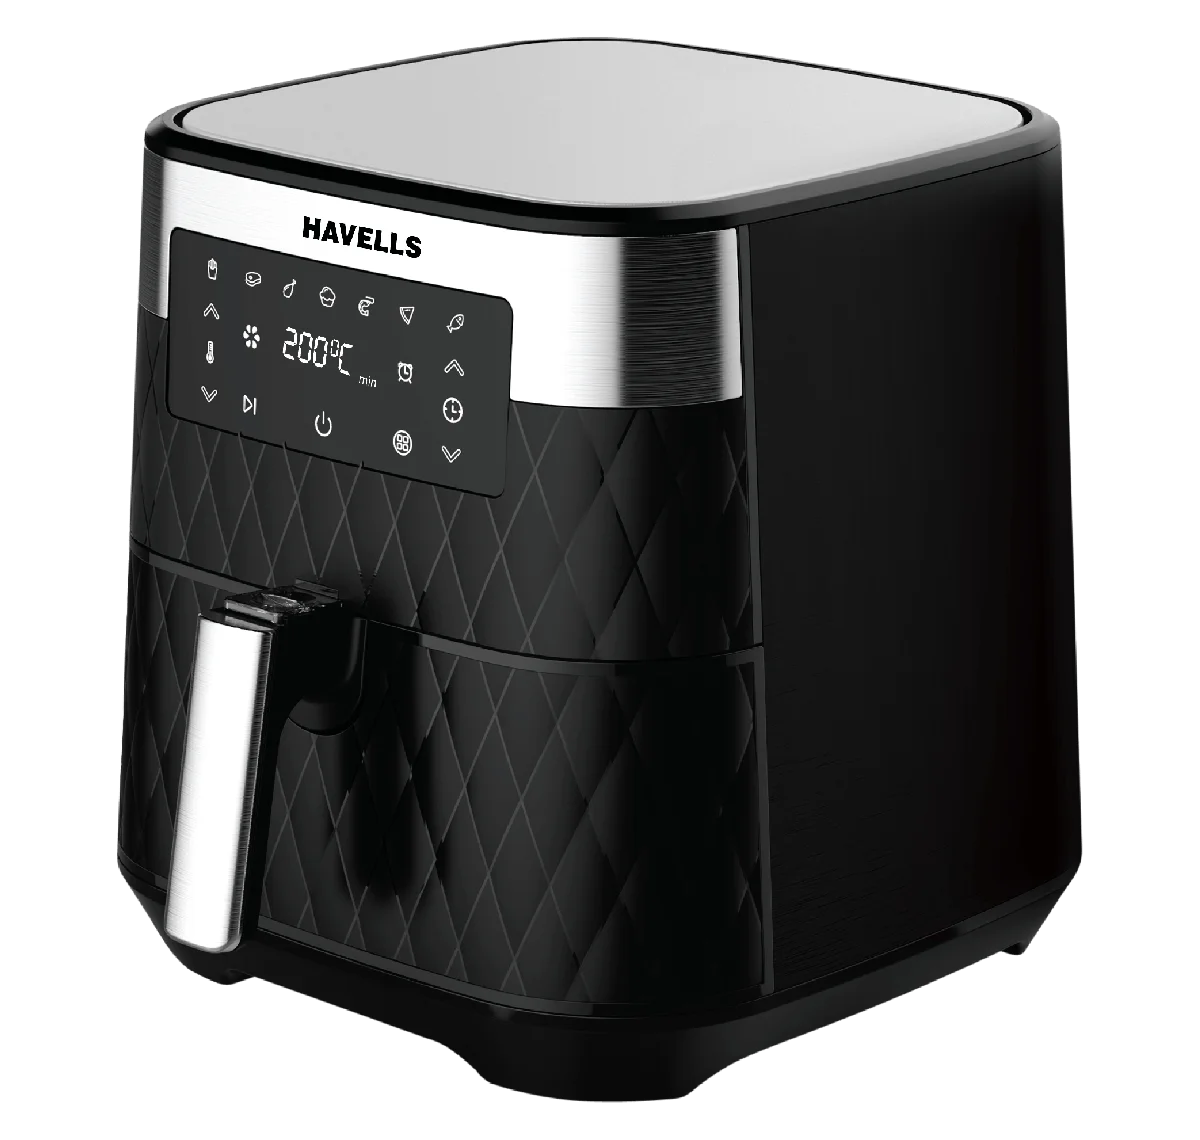 Havells Air Oven Air Fryer Suppliers Coimbatore